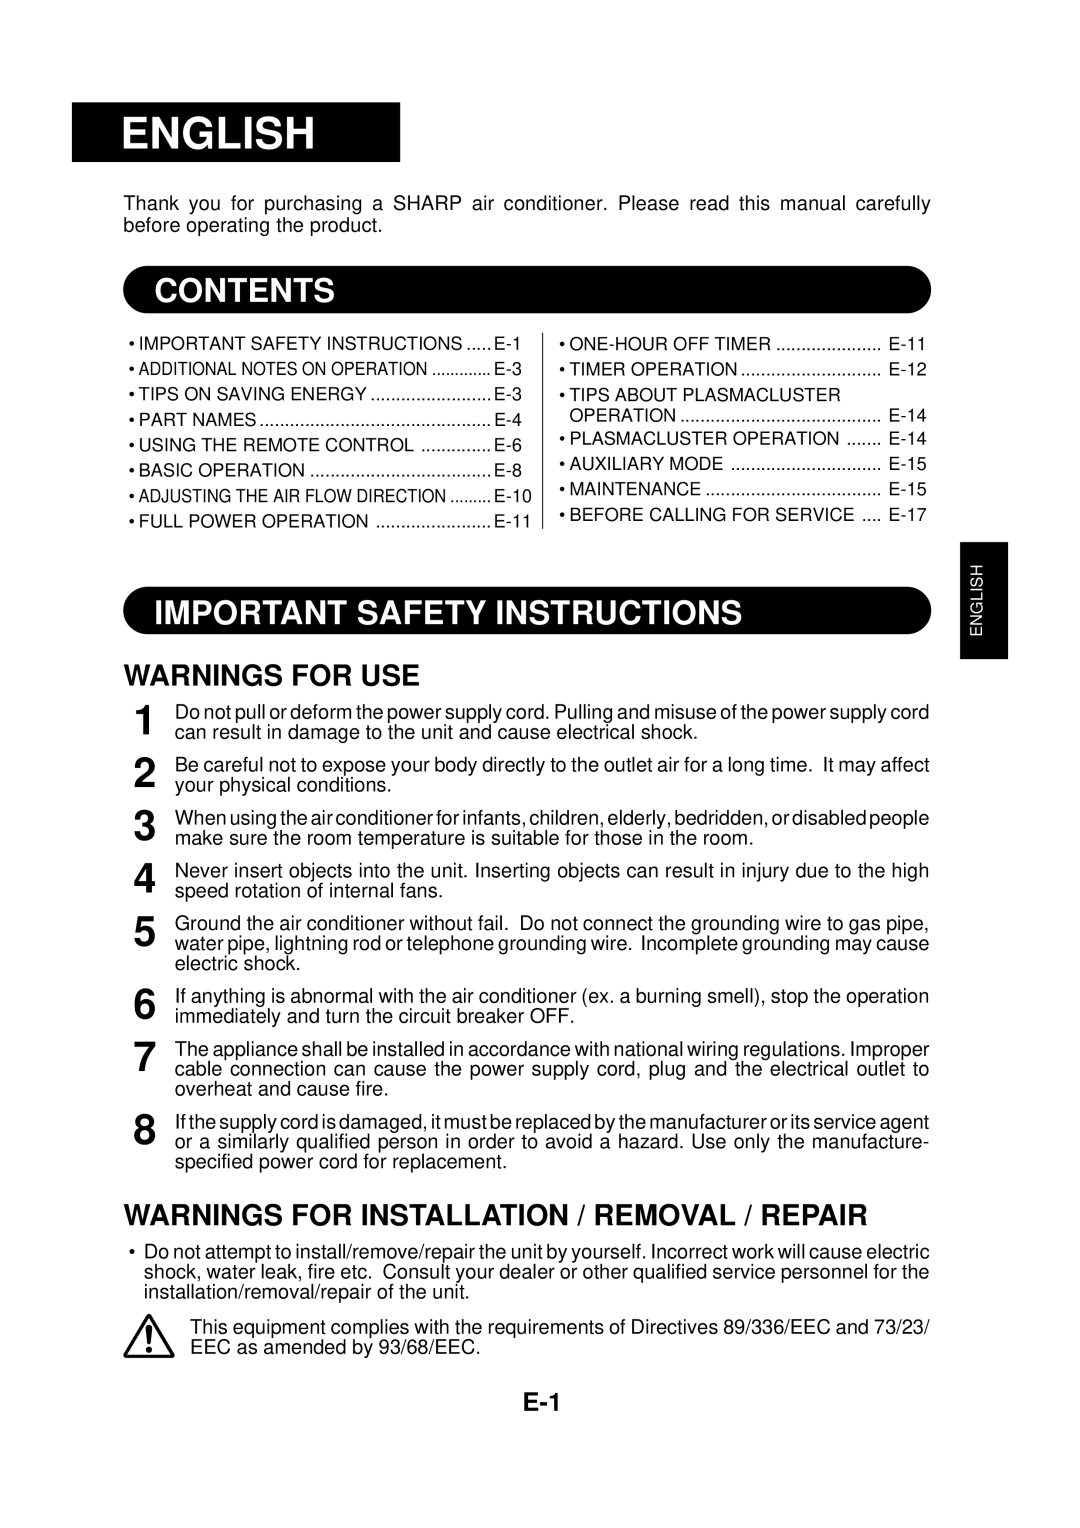 Sharp GS-XP24FR Contents, Important Safety Instructions, Warnings For Use, Warnings For Installation / Removal / Repair 